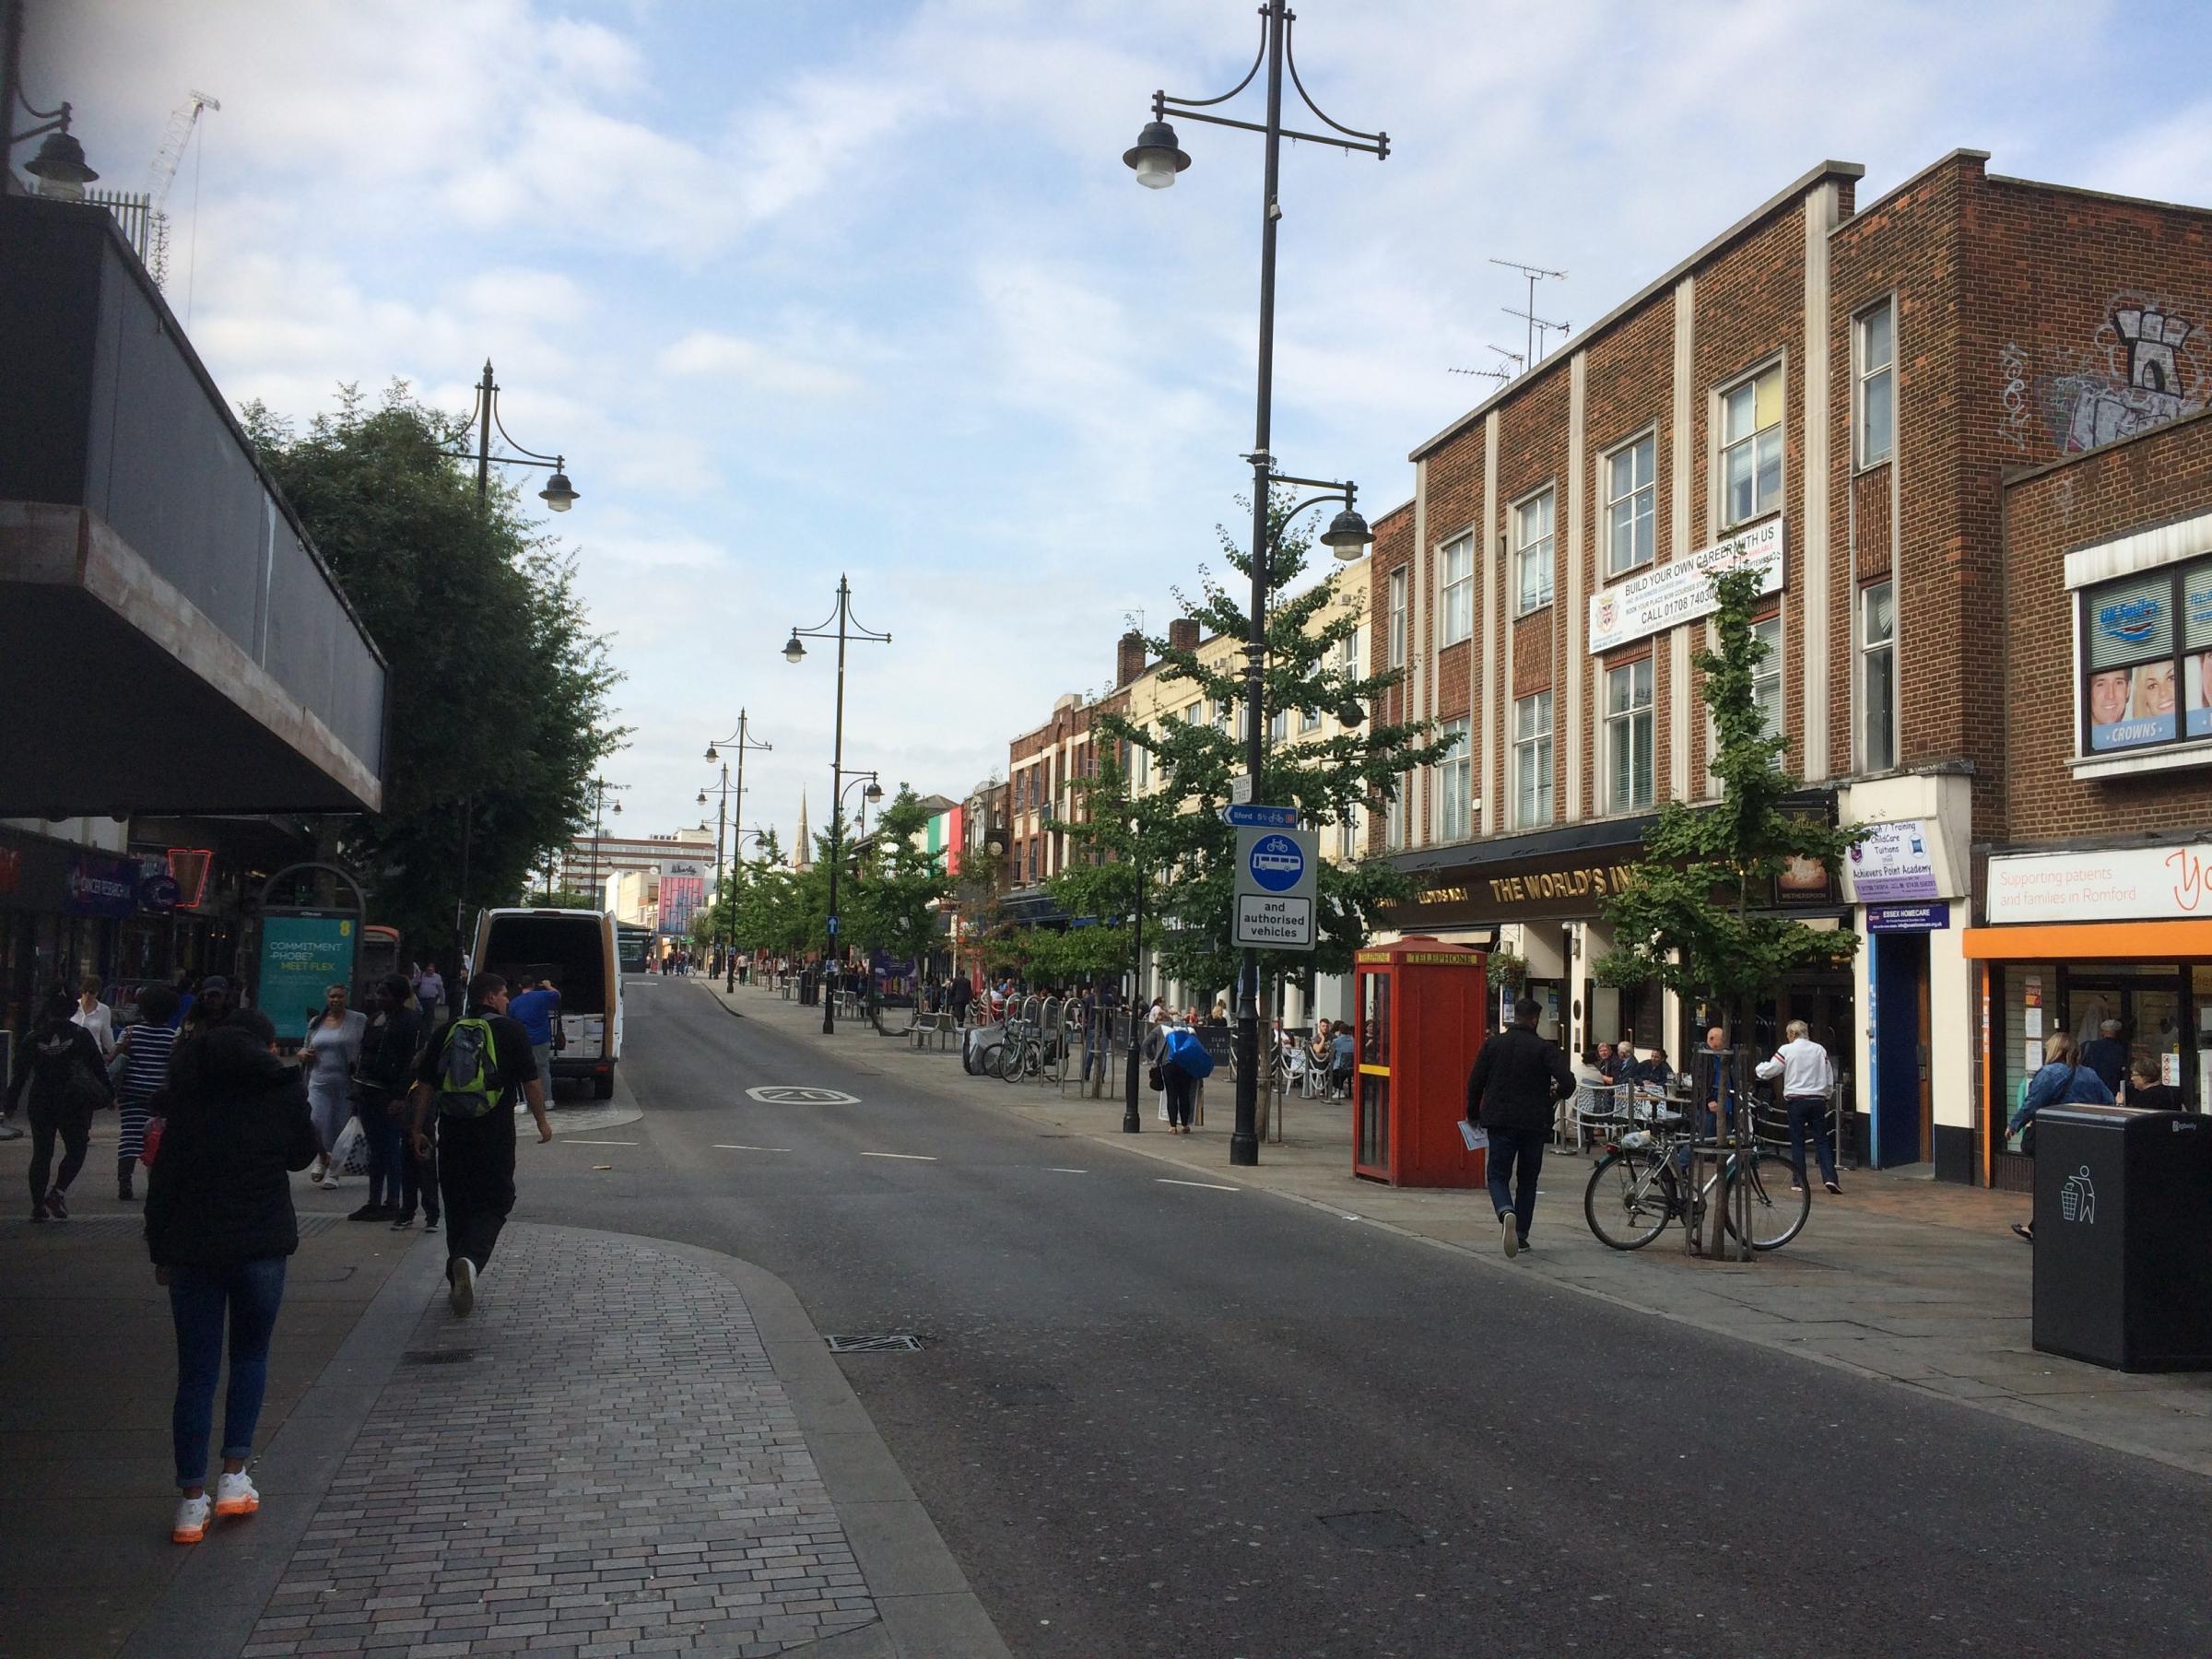 Census 2021: What was learnt about Havering in latest data?